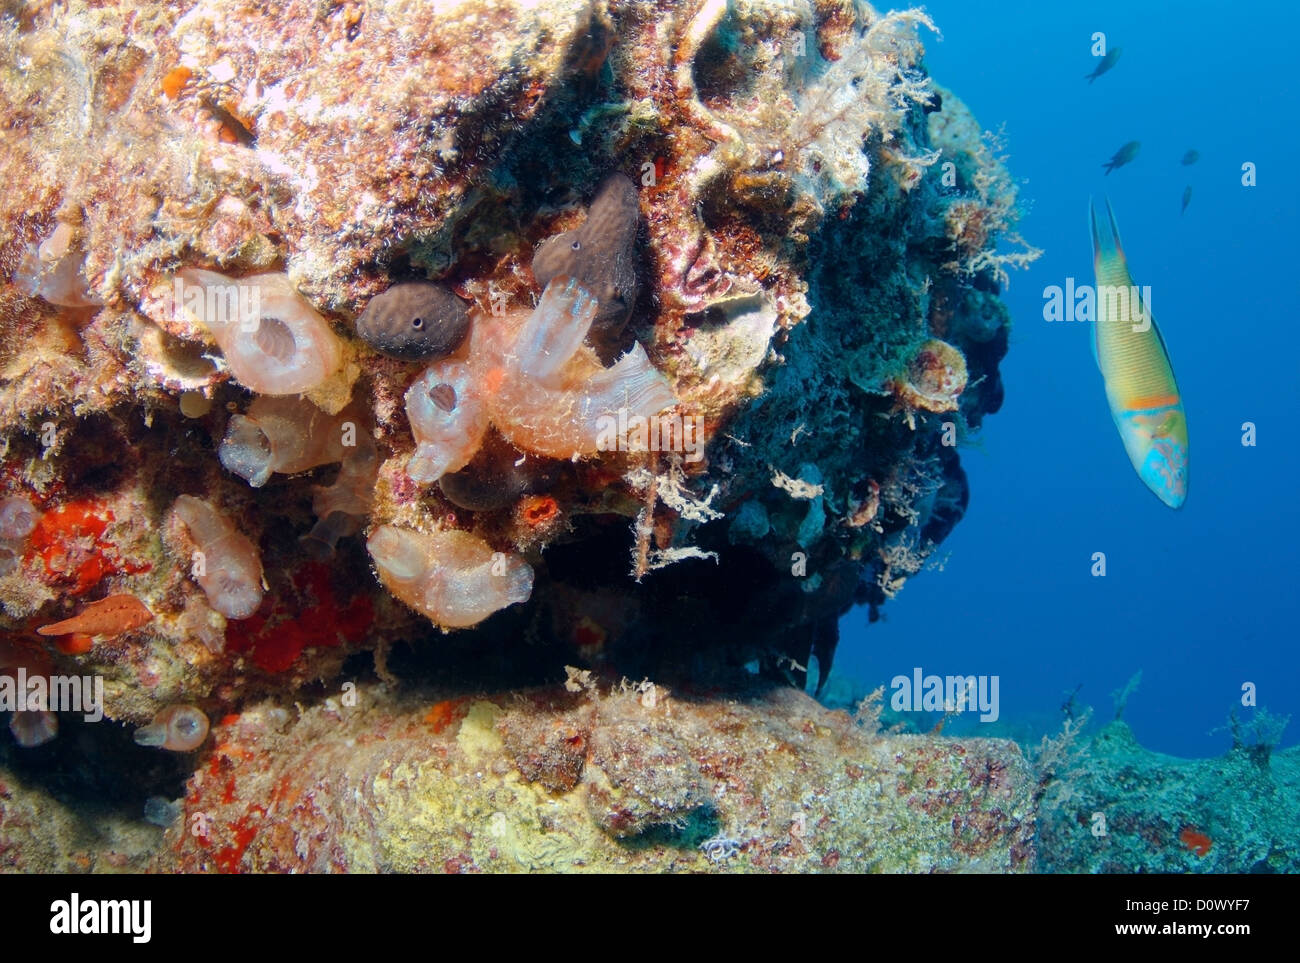 Moon wrasse or crescent wrasse (Thalassoma lunare) is swimming next to the colony ascidians or sea squirts (Halocynthia sp.) Stock Photo